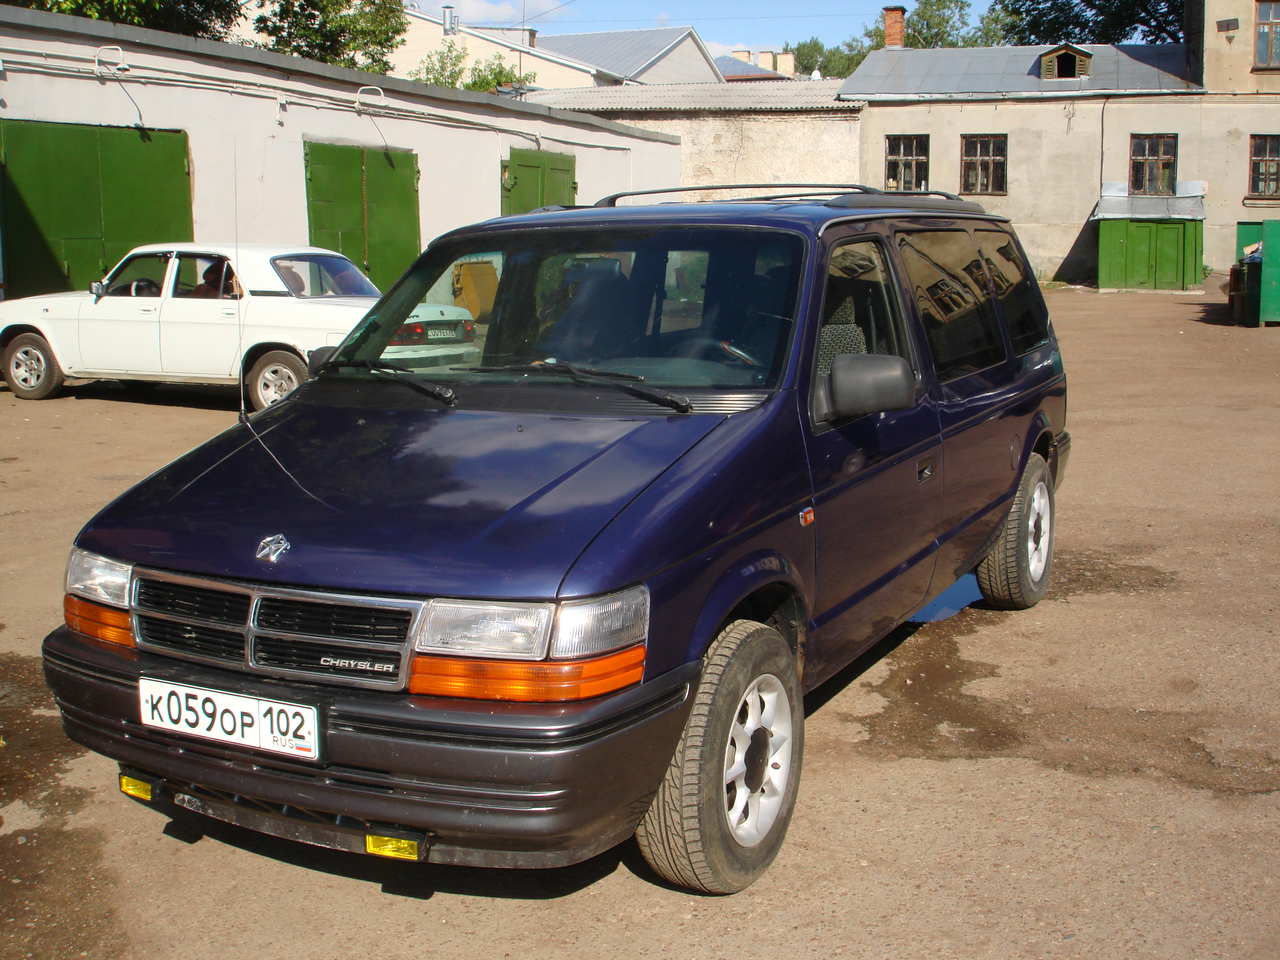 1995 Chrysler Voyager specs, Engine size 2.5, Fuel type